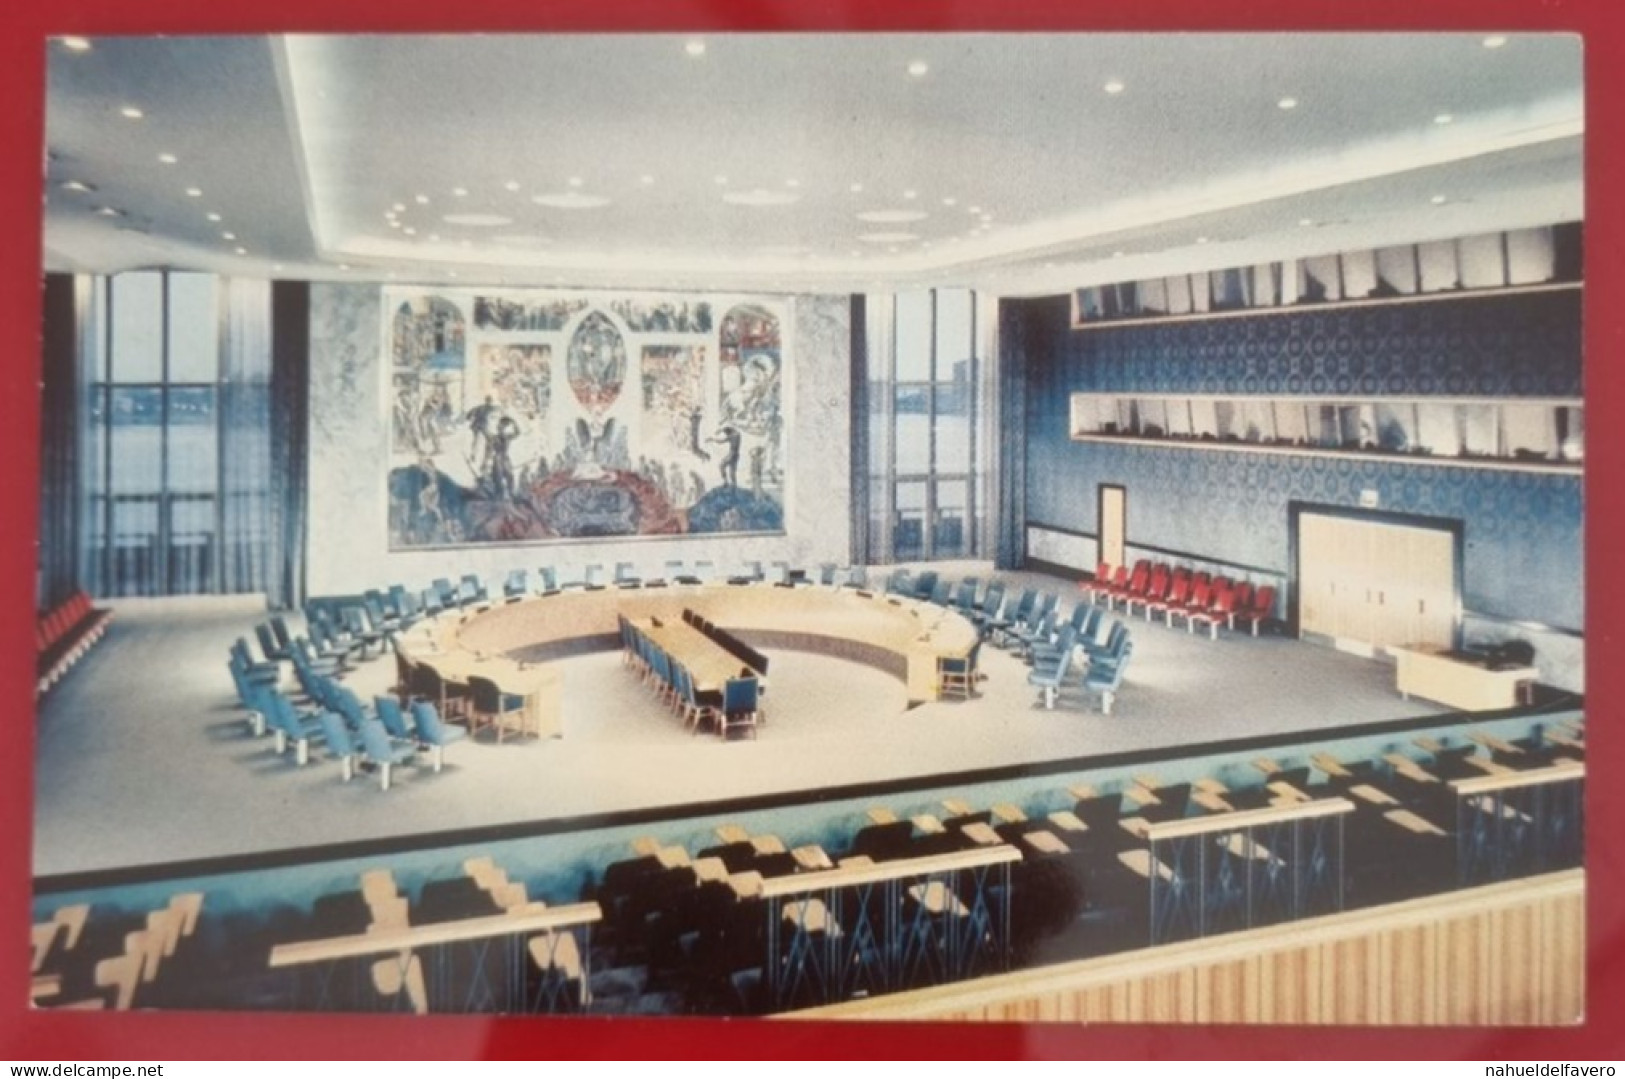 Uncirculated Postcard - USA - NY, NEW YORK CITY - UNITED NATIONS, SECURITY COUNCIL CHAMBER - Places & Squares